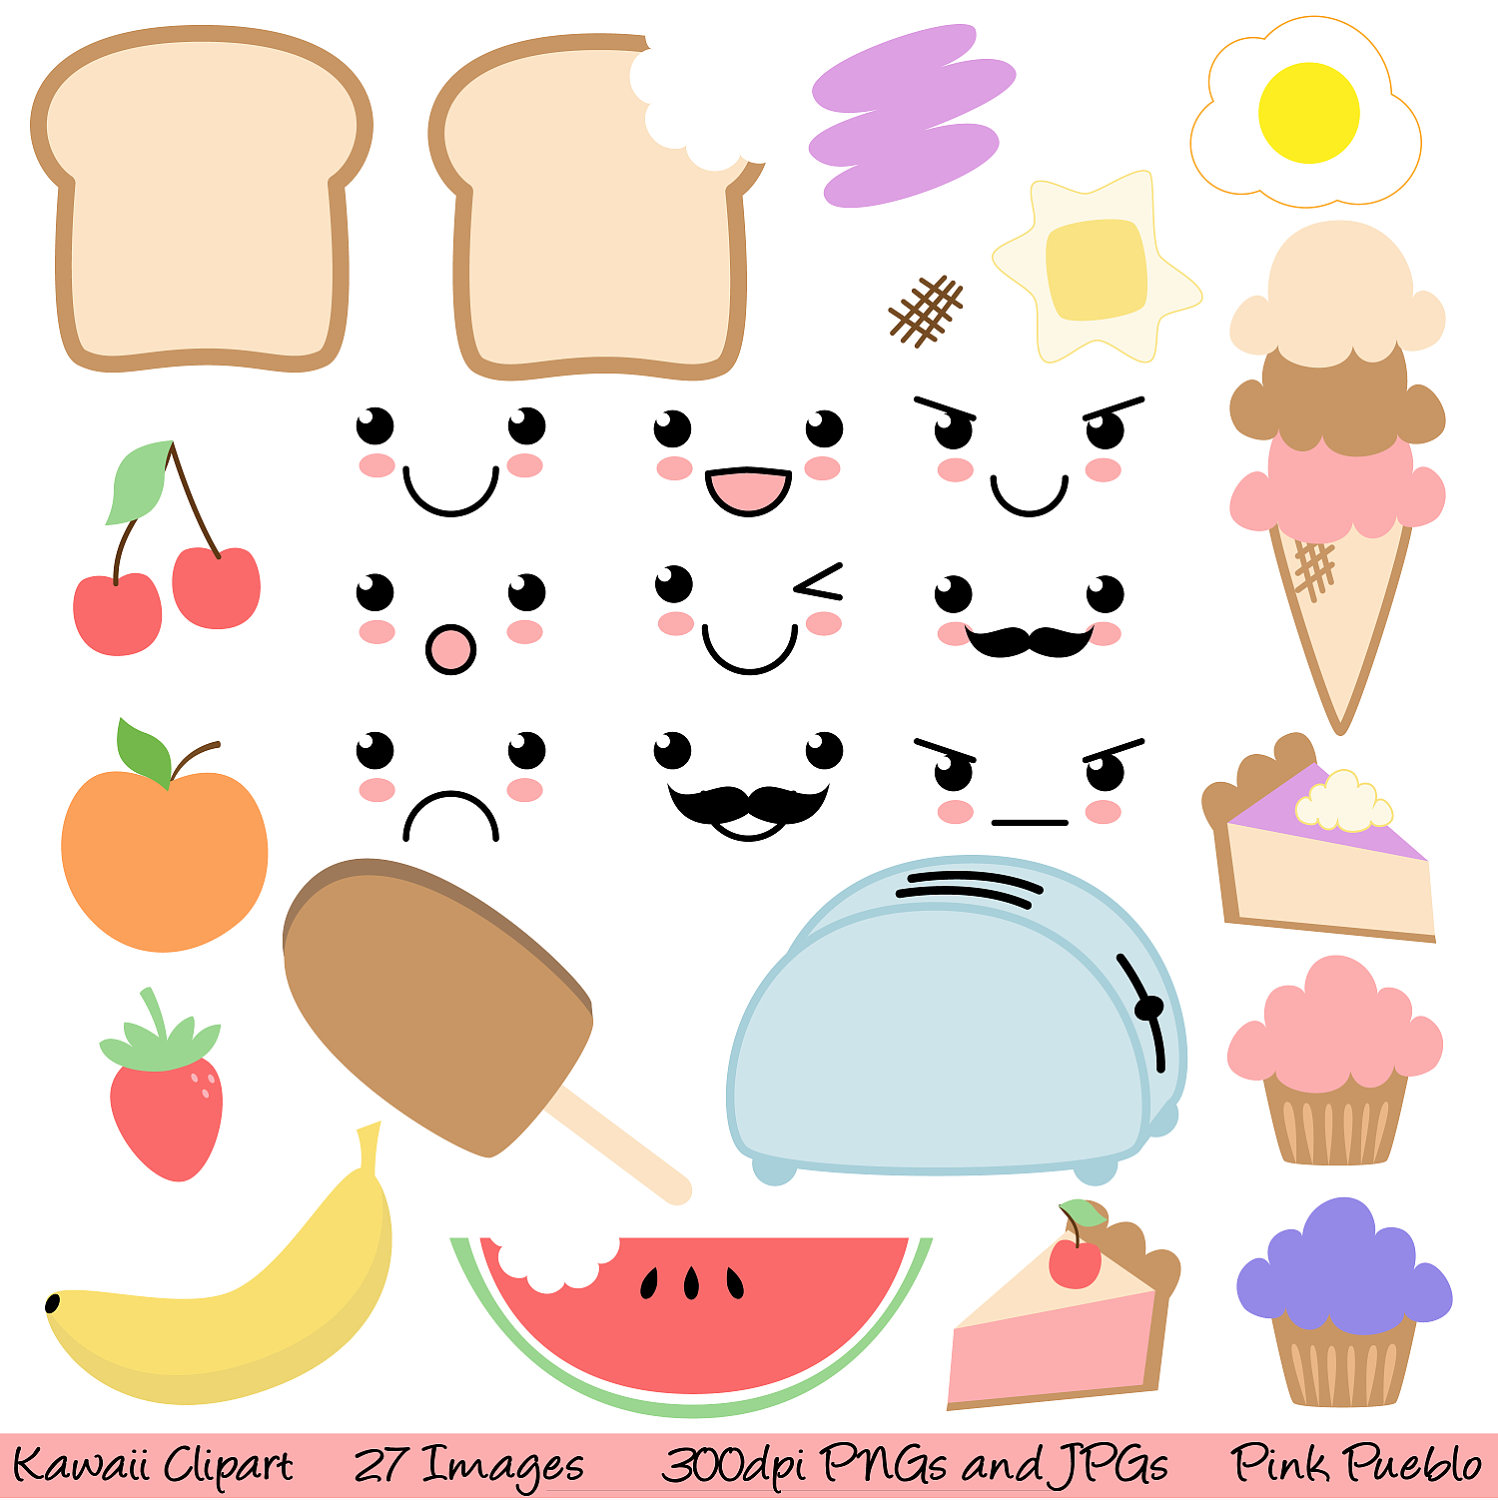 Kawaii Food Clipart Clip Art Commercial And By Pinkpueblo On Etsy